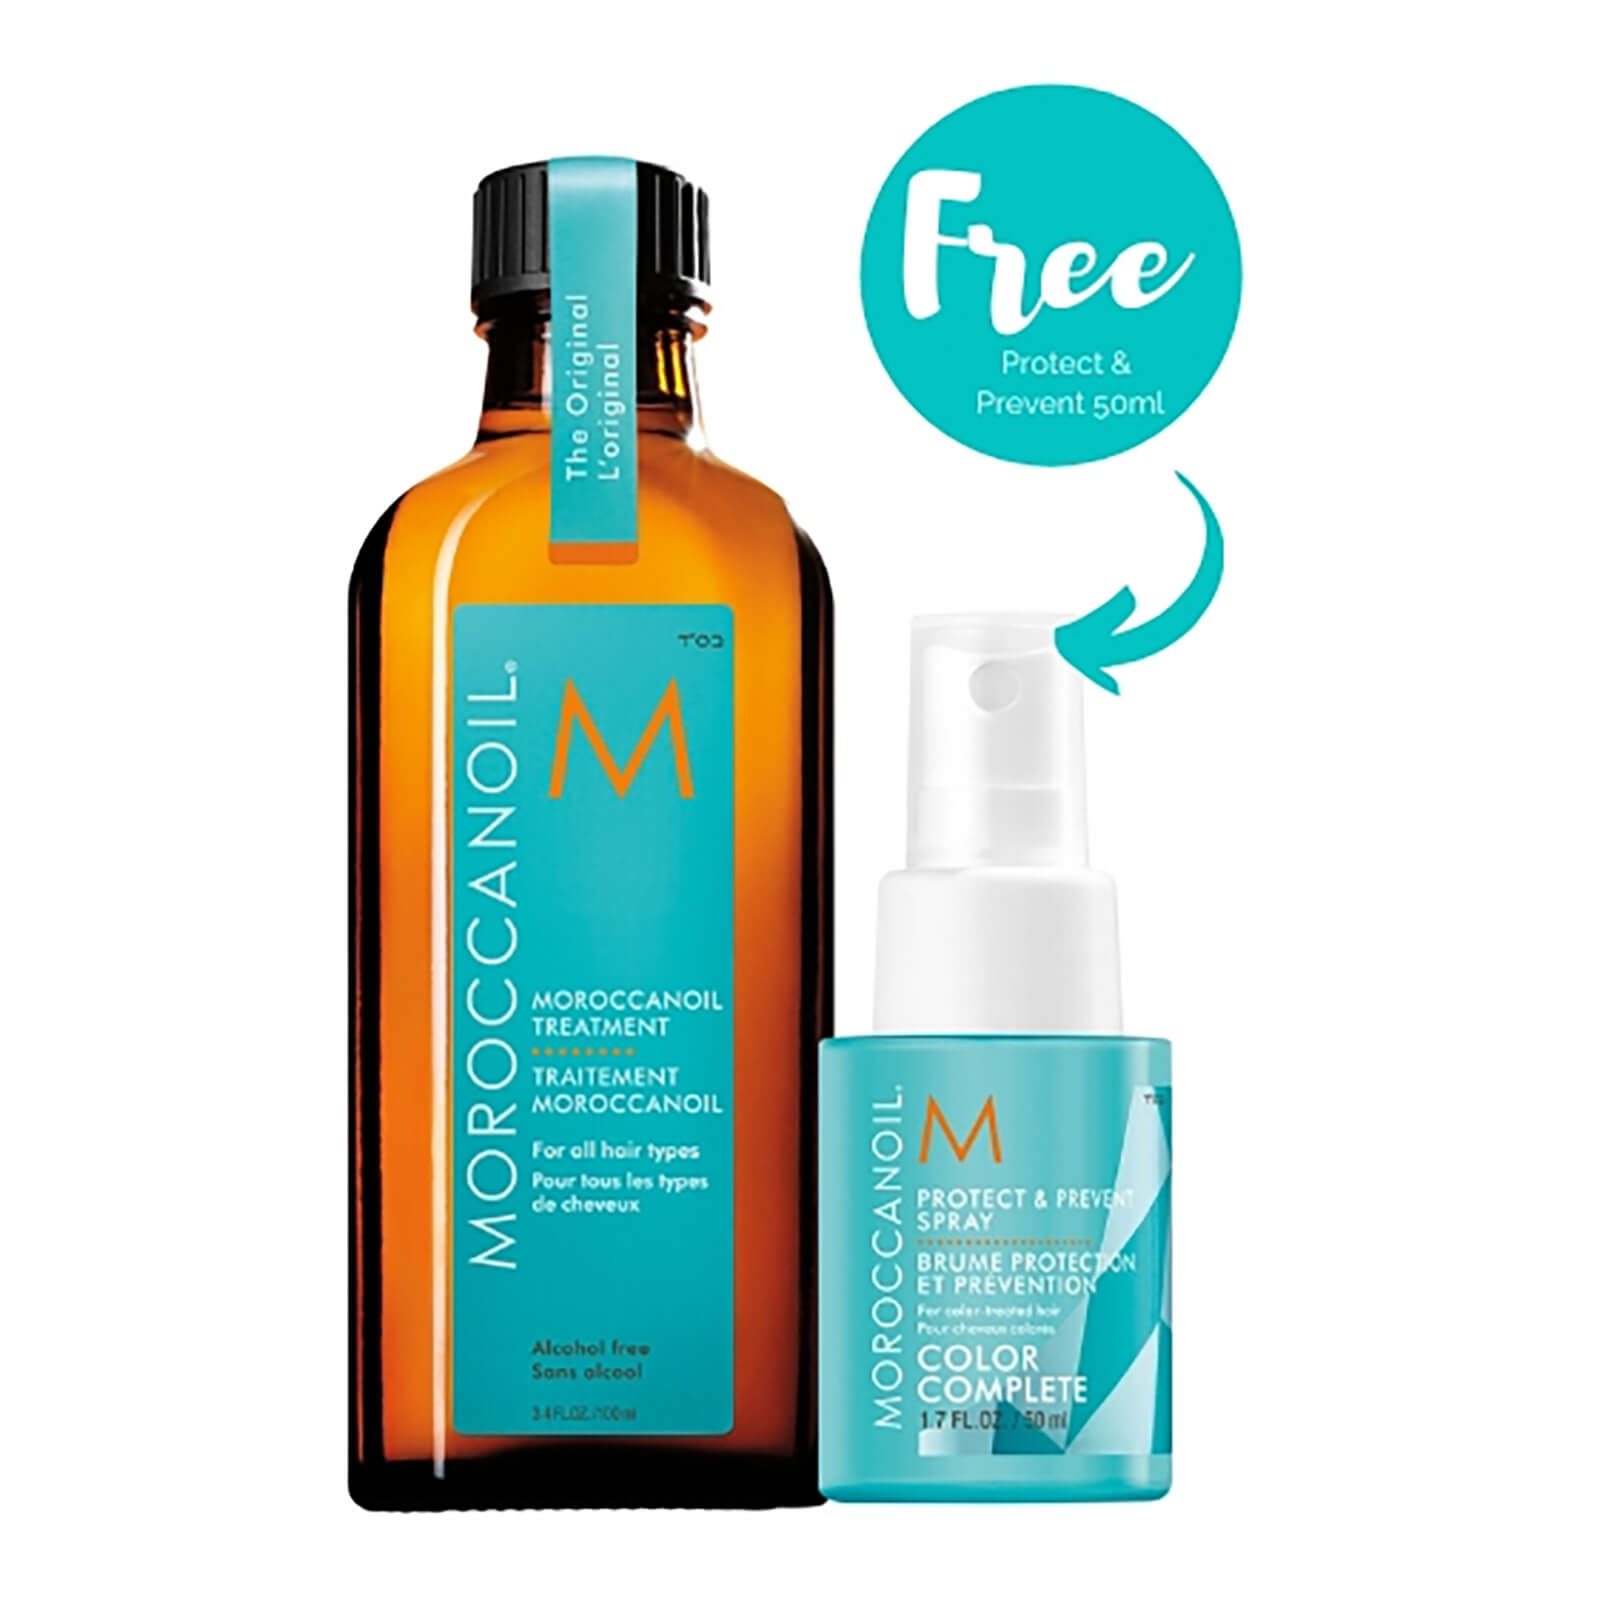 Moroccanoil Treatment with Free Protect & Prevent Spray